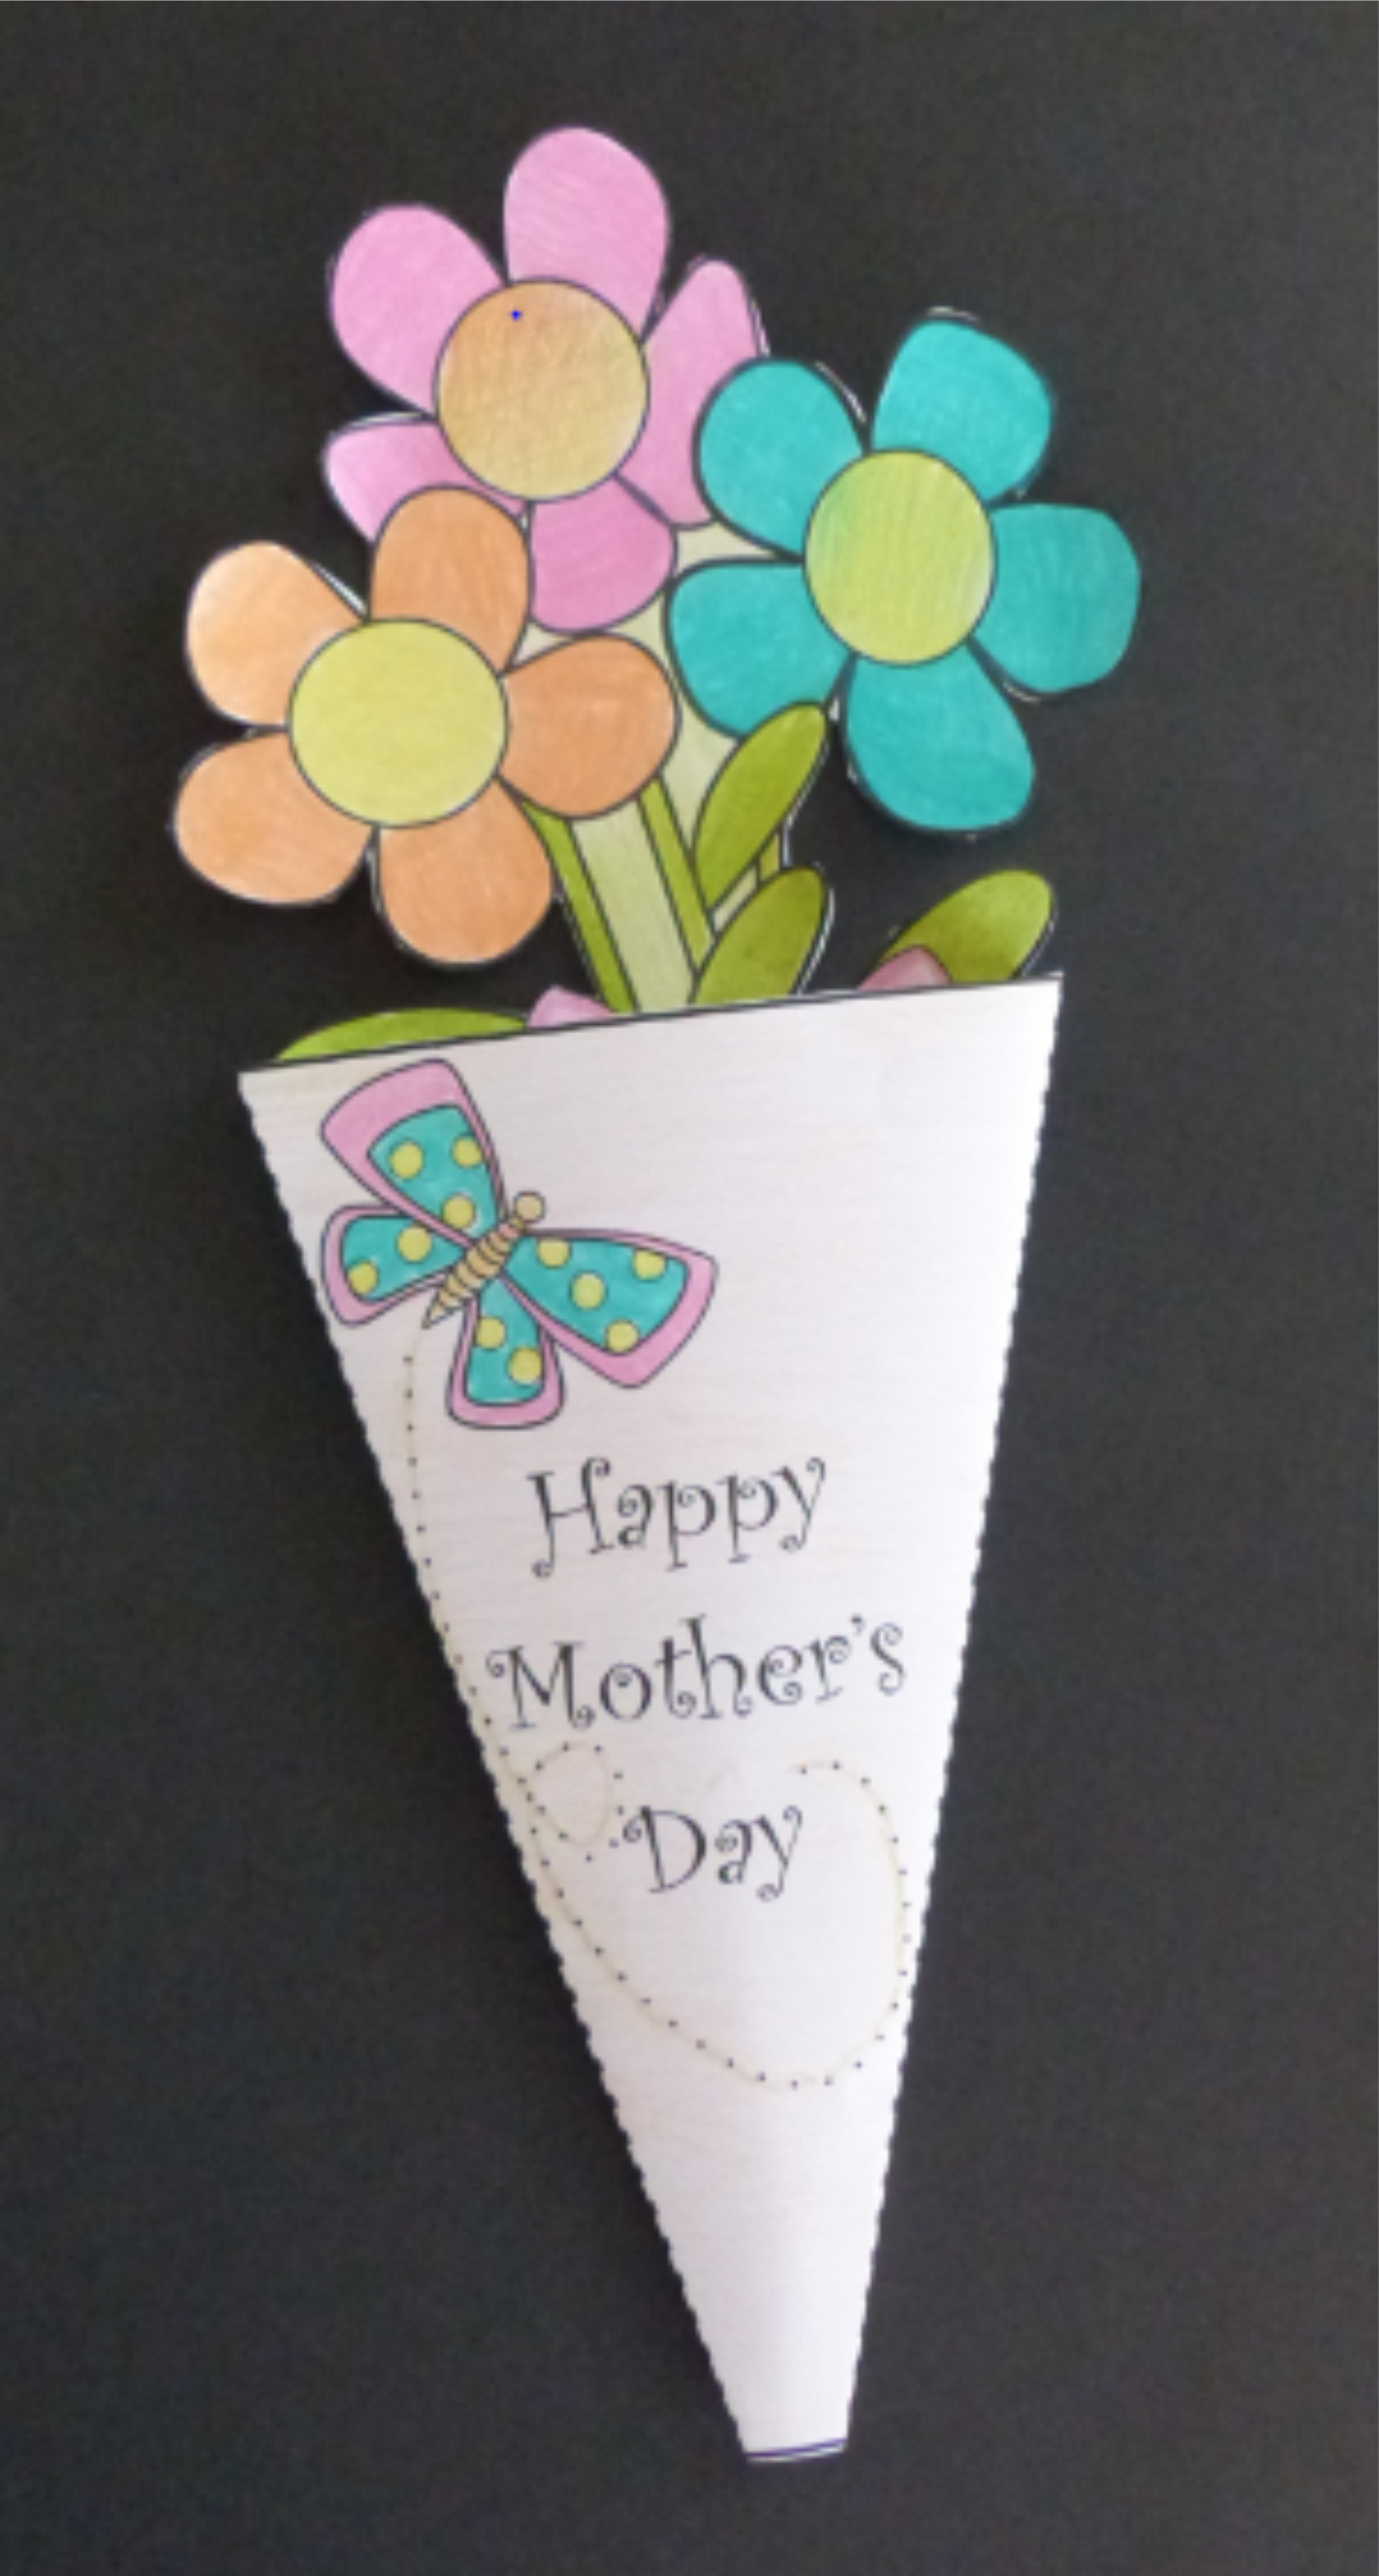 Mother's Day Crafts - Flower Bouquet for Mom / Mum